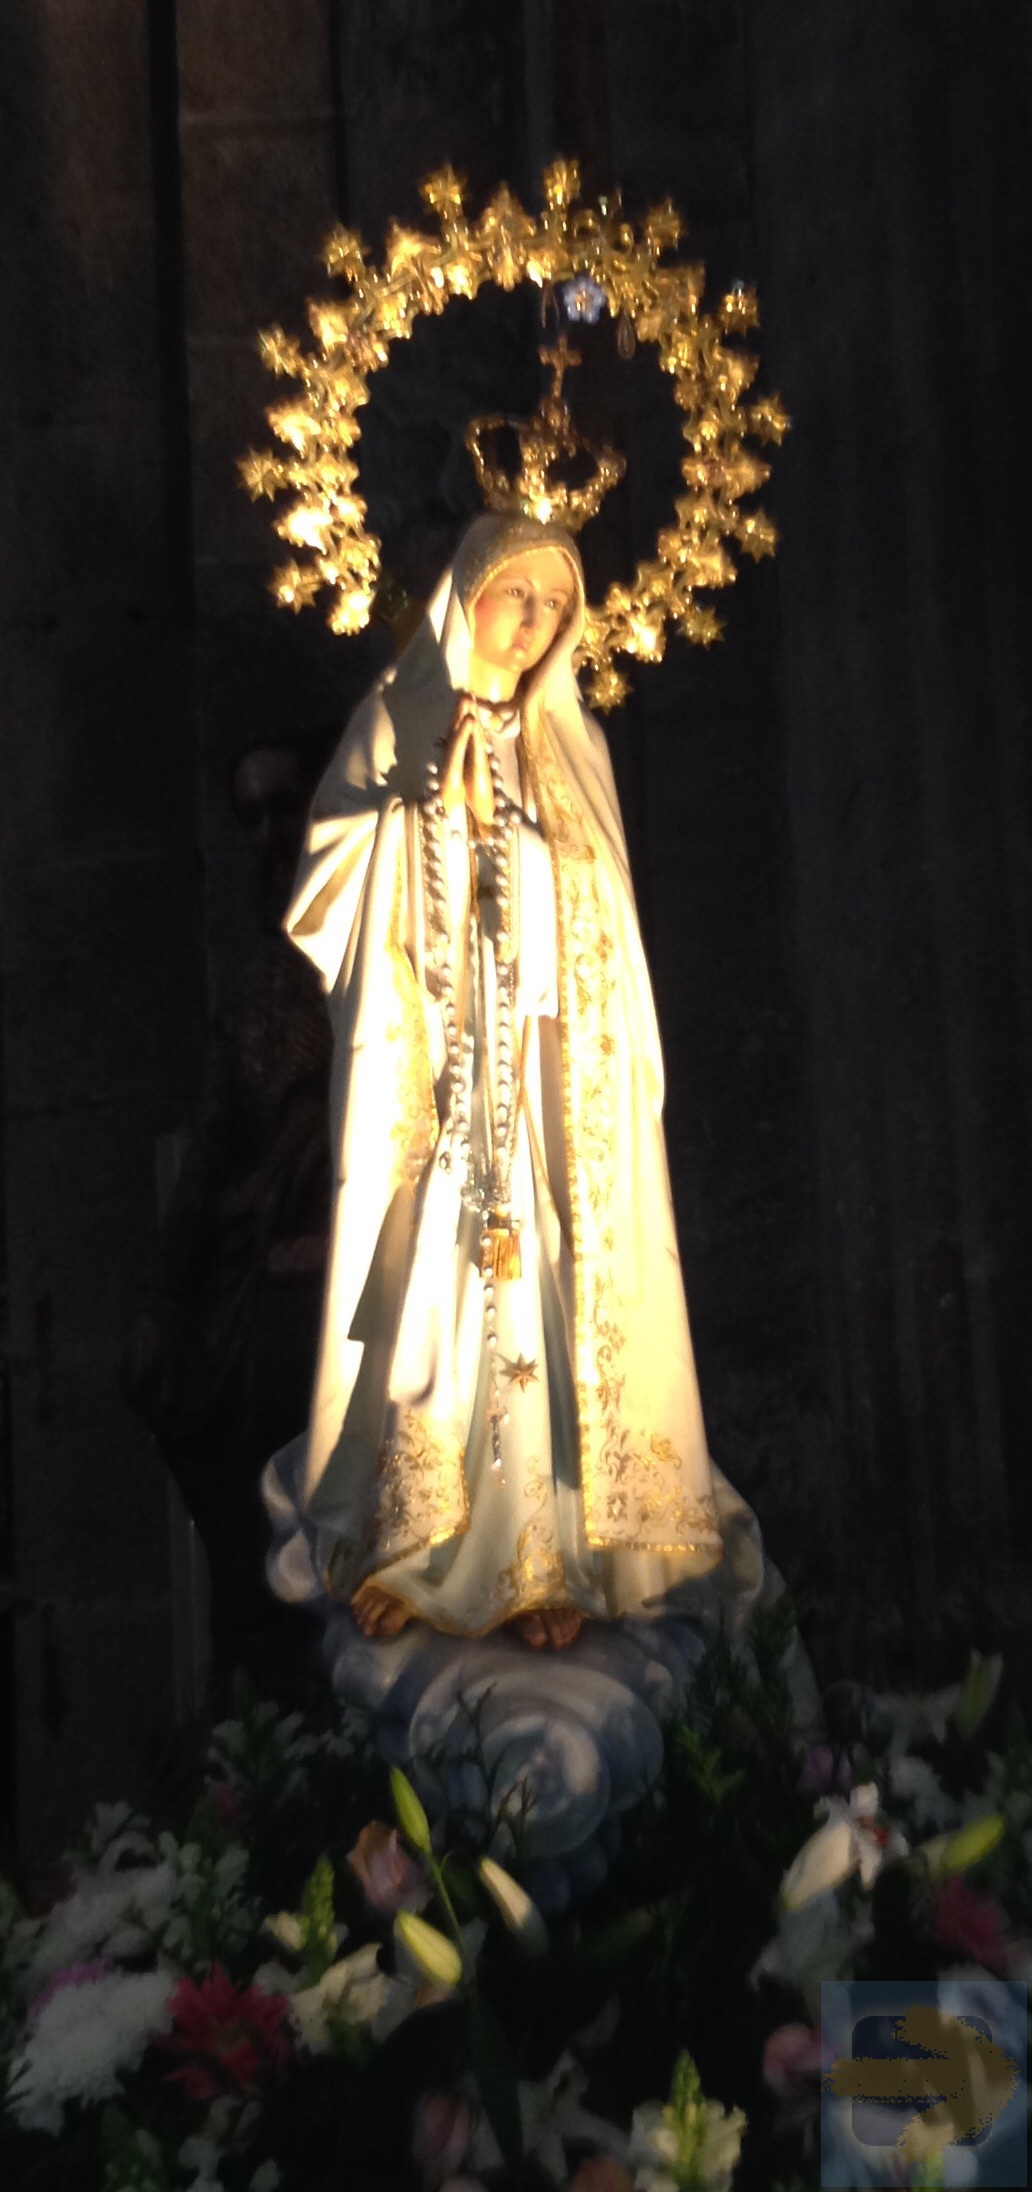 Statue of Virgin Mary , Cathedral, Santiago